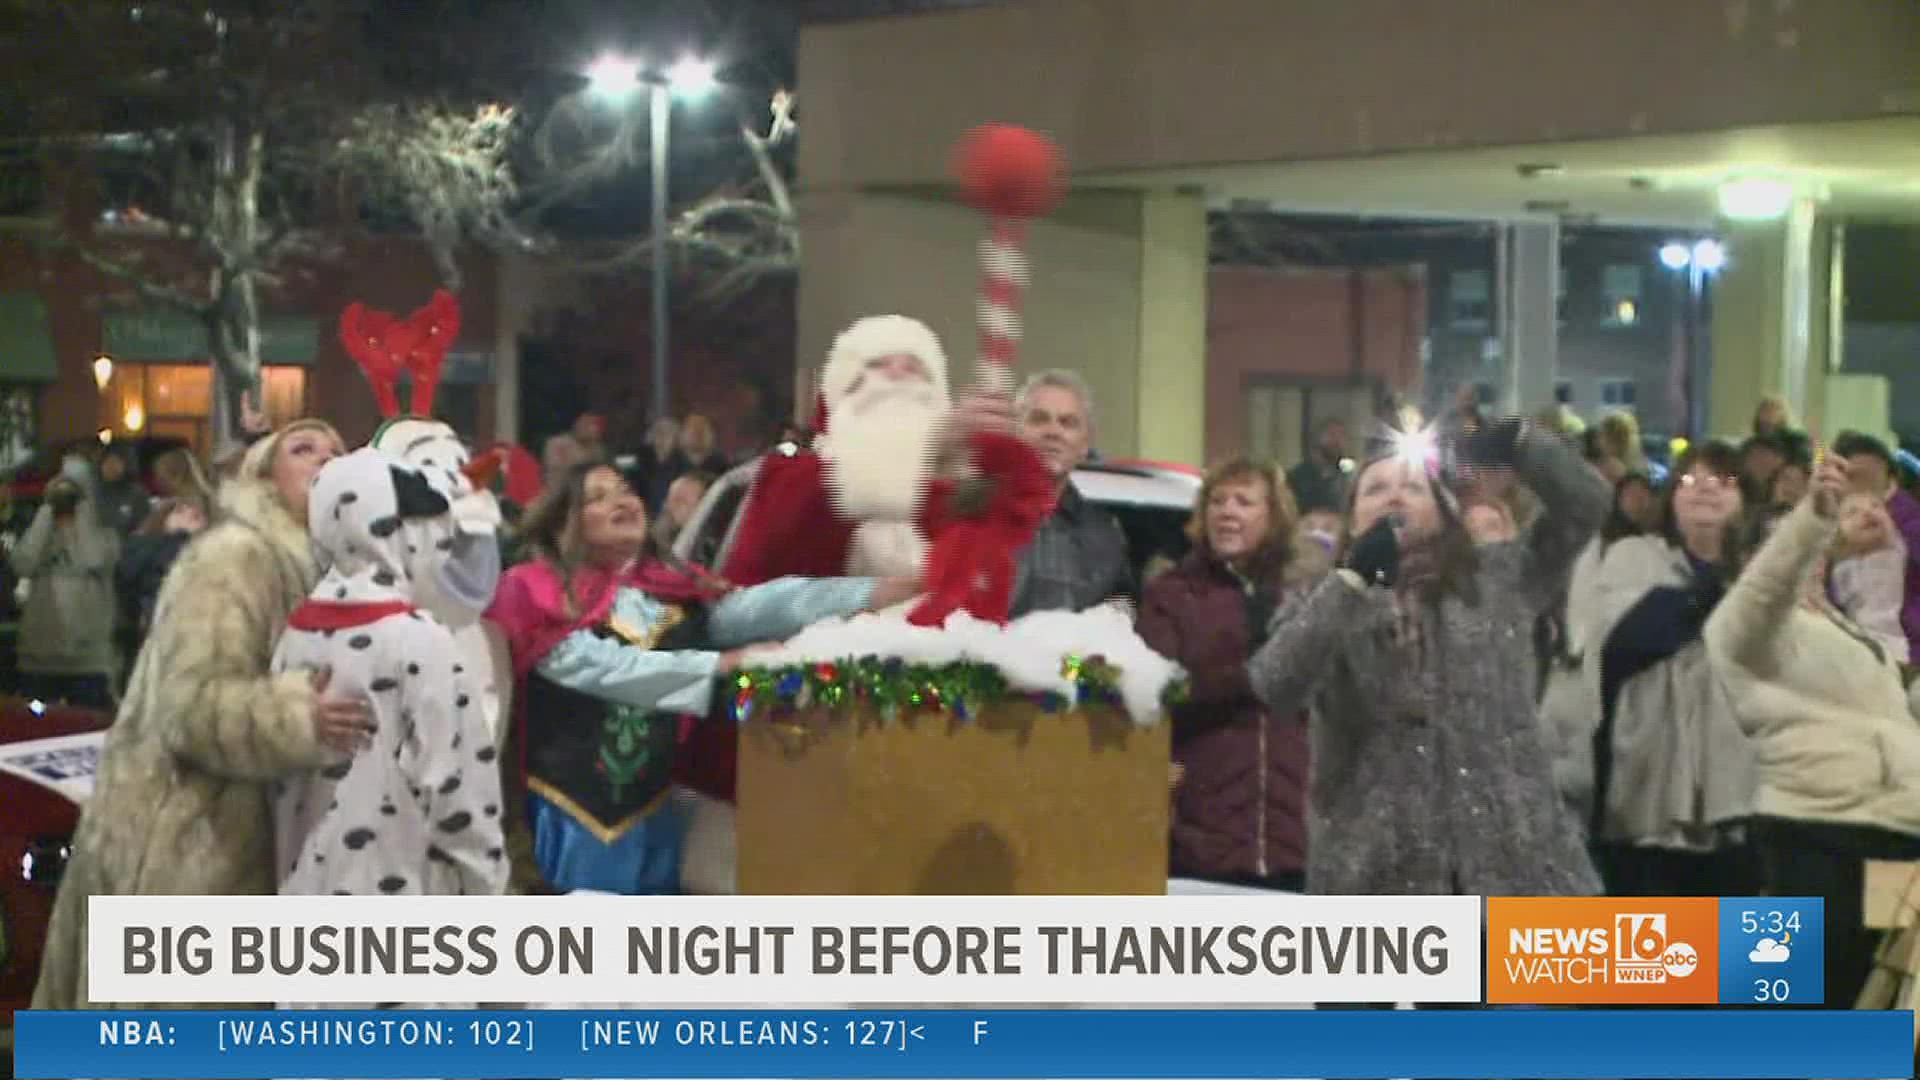 Scranton celebrated the night before Thanksgiving by welcoming back onlookers for the annual tower lighting.